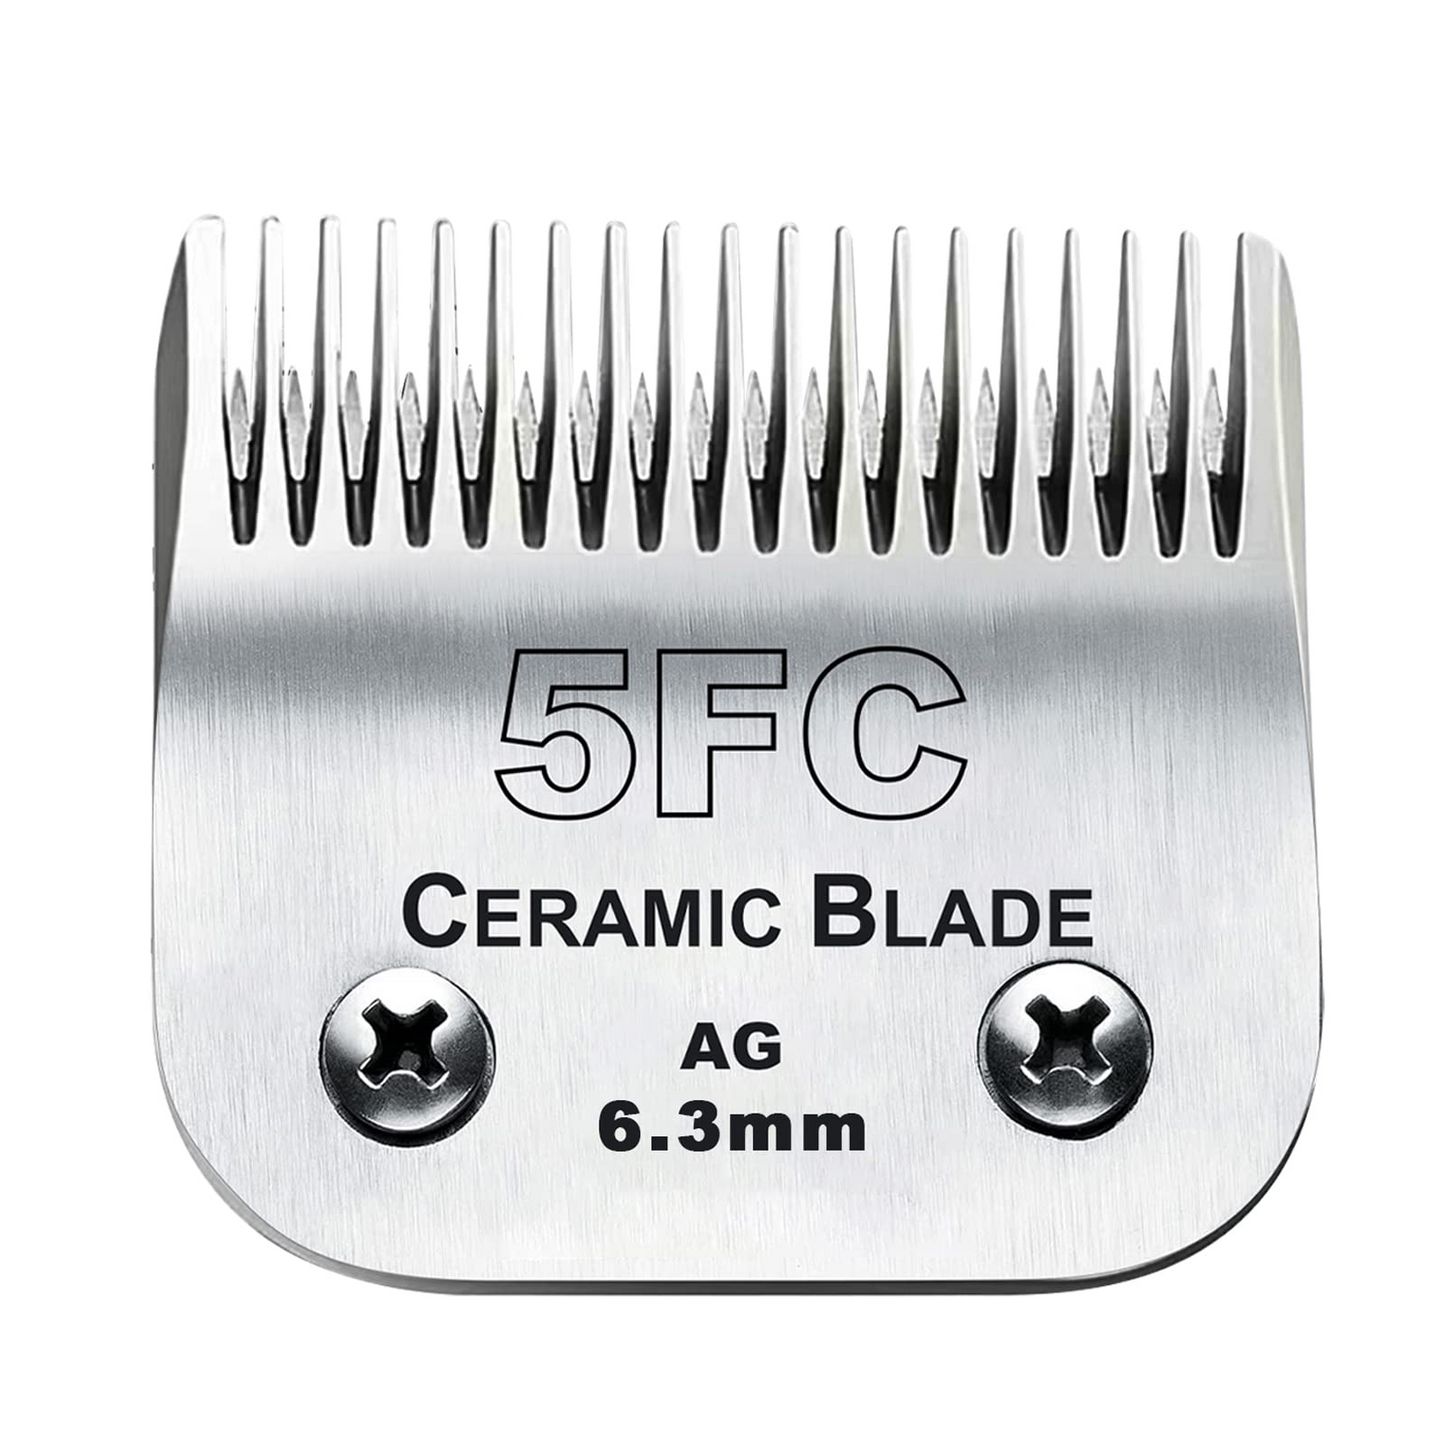 Dog Grooming Clipper Replacement Blades Compatible with Andis/Wahl / Oster Dog Clippers #10+#30+5FC